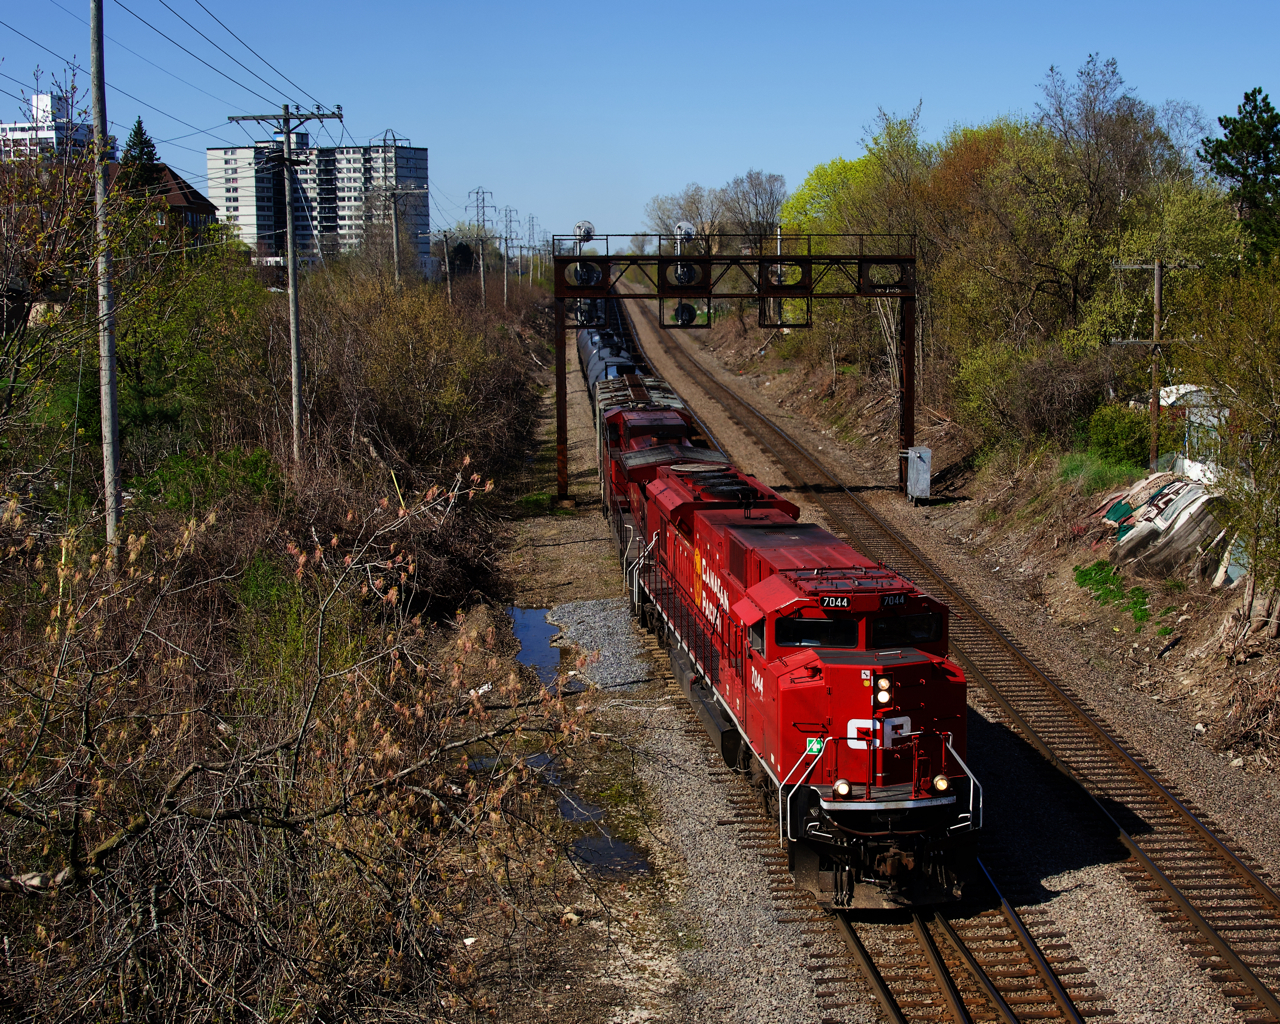 Ethanol train CP 528 (formerly CP 650) has just departed southwards with a new crew onboard as it approaches North Jct with CP 7044 & CP 9819 up front. It is coming off of the Farnham Connection and onto the Adirondack Sub.